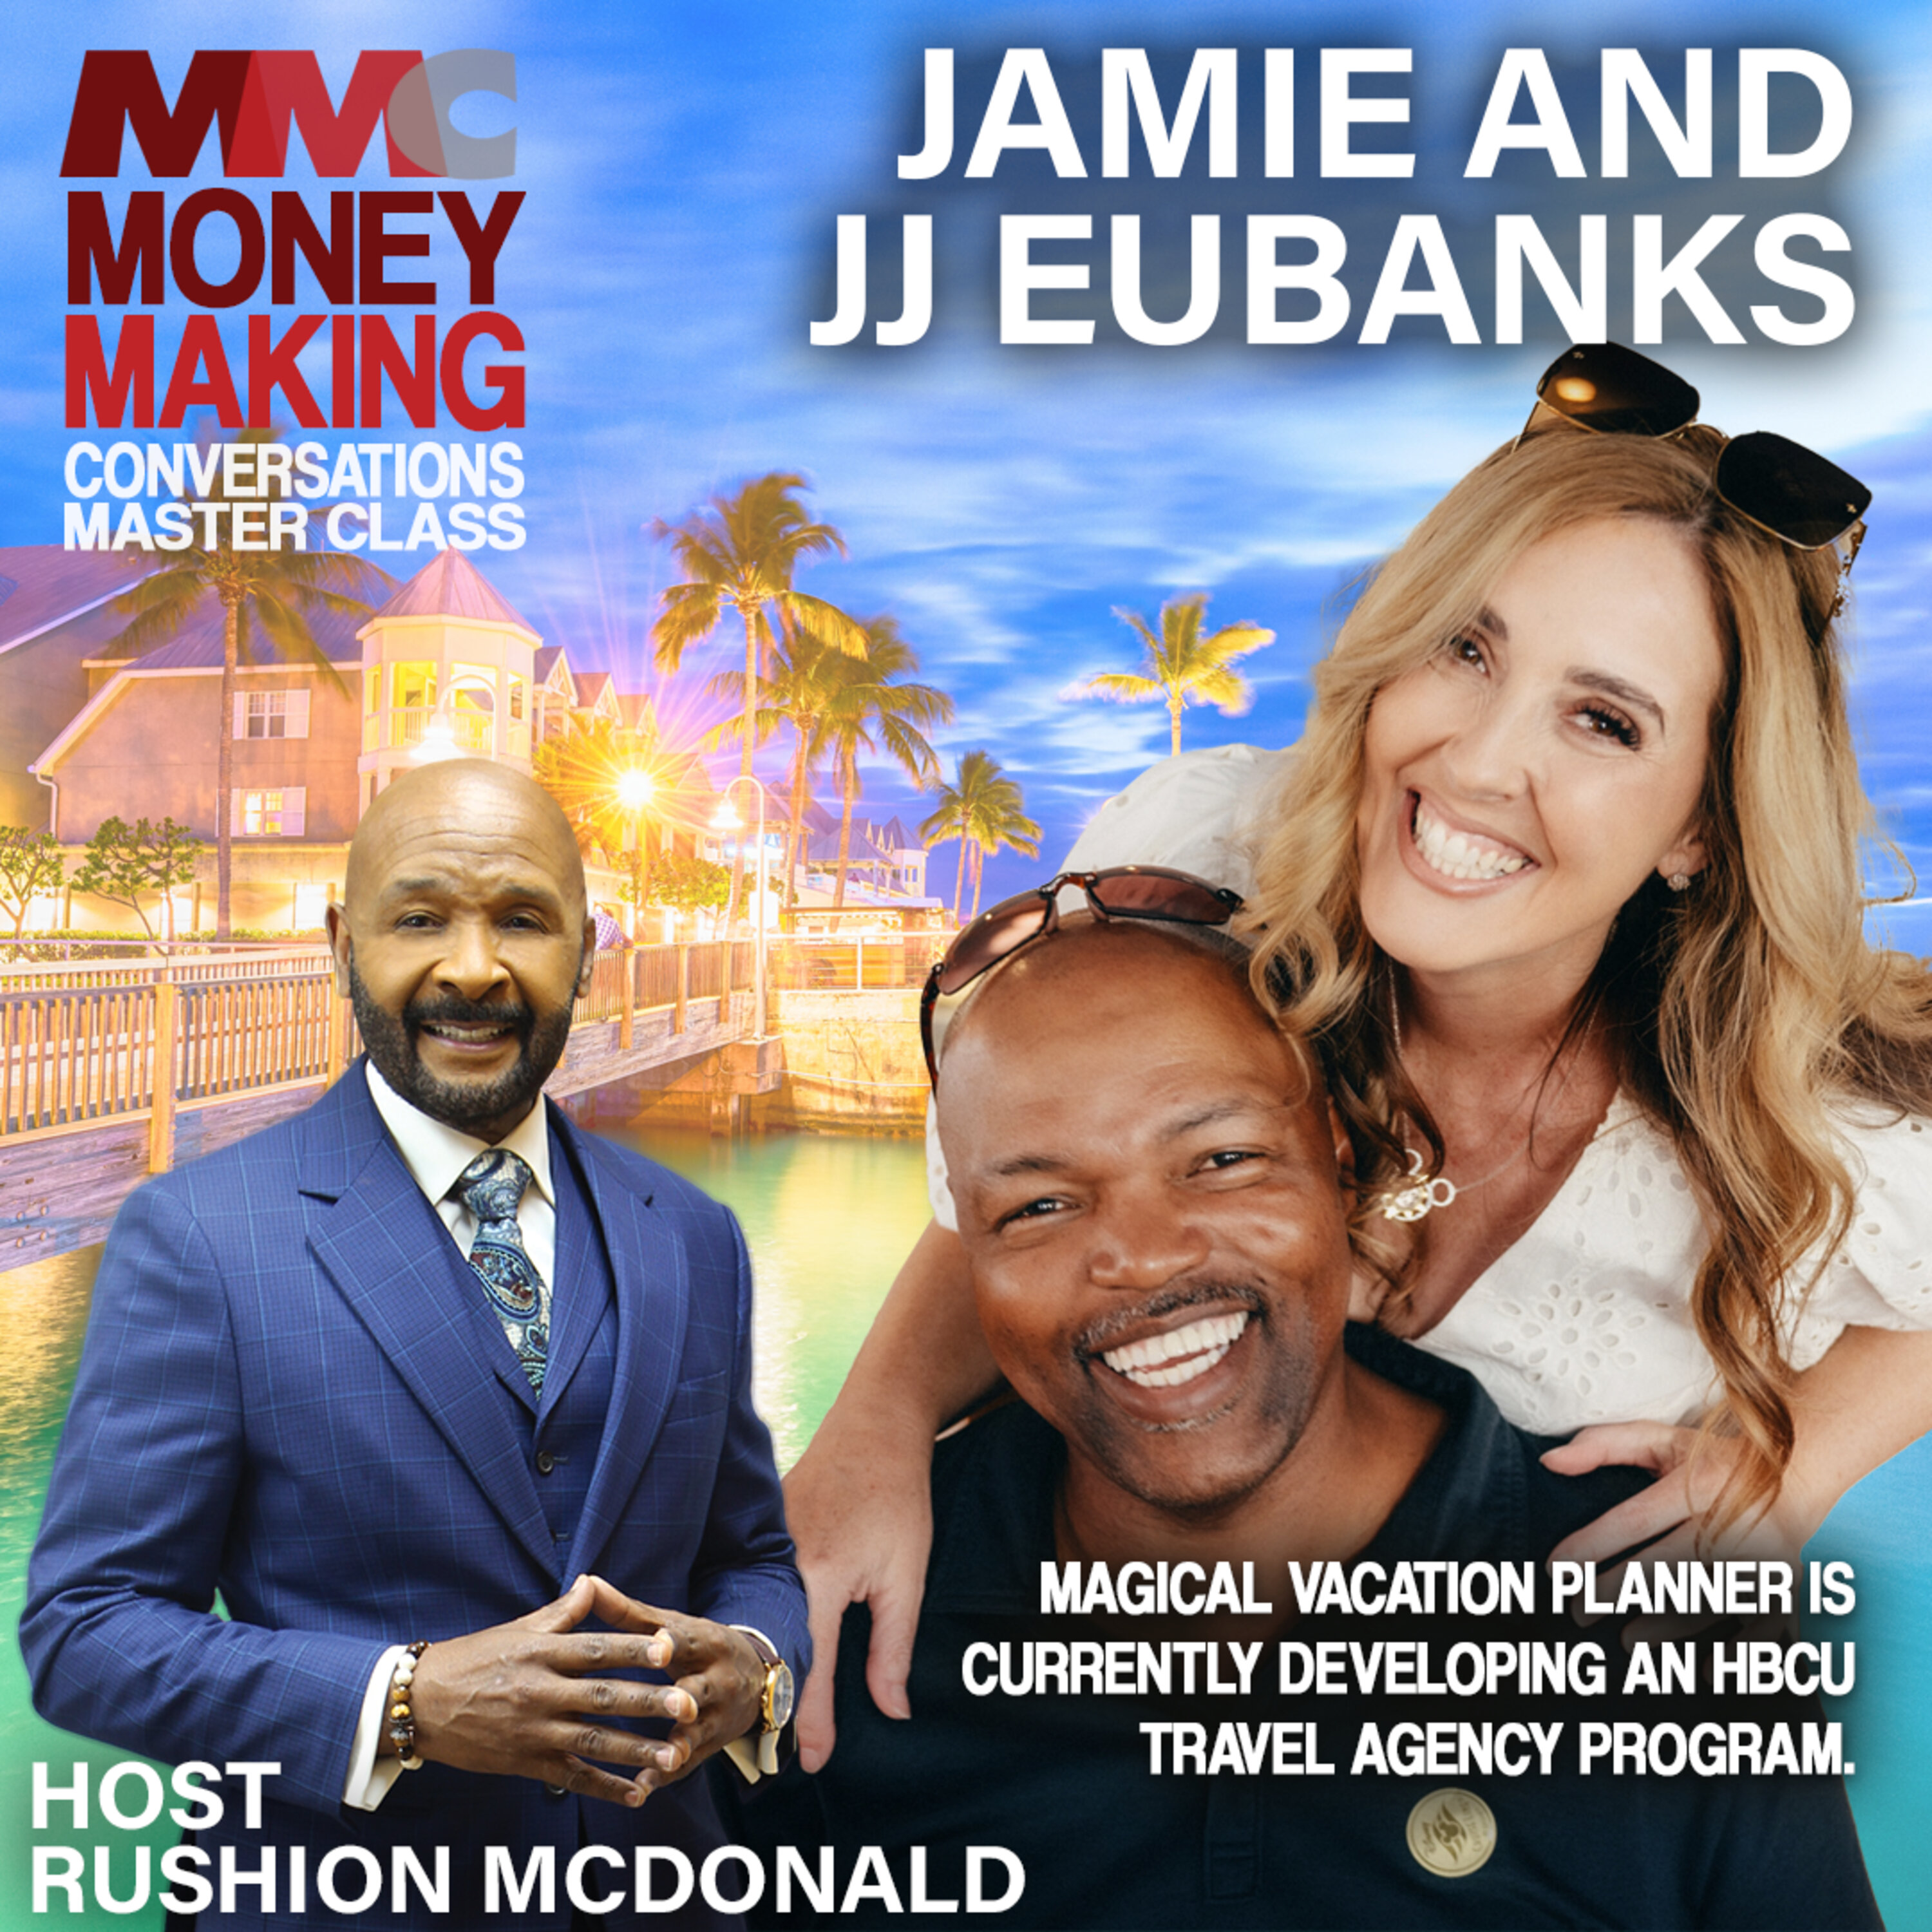 Magical Vacation Planners are MVP Parks, MVP Cruising and MVP Getaways founded by Jamie and JJ Eubanks.